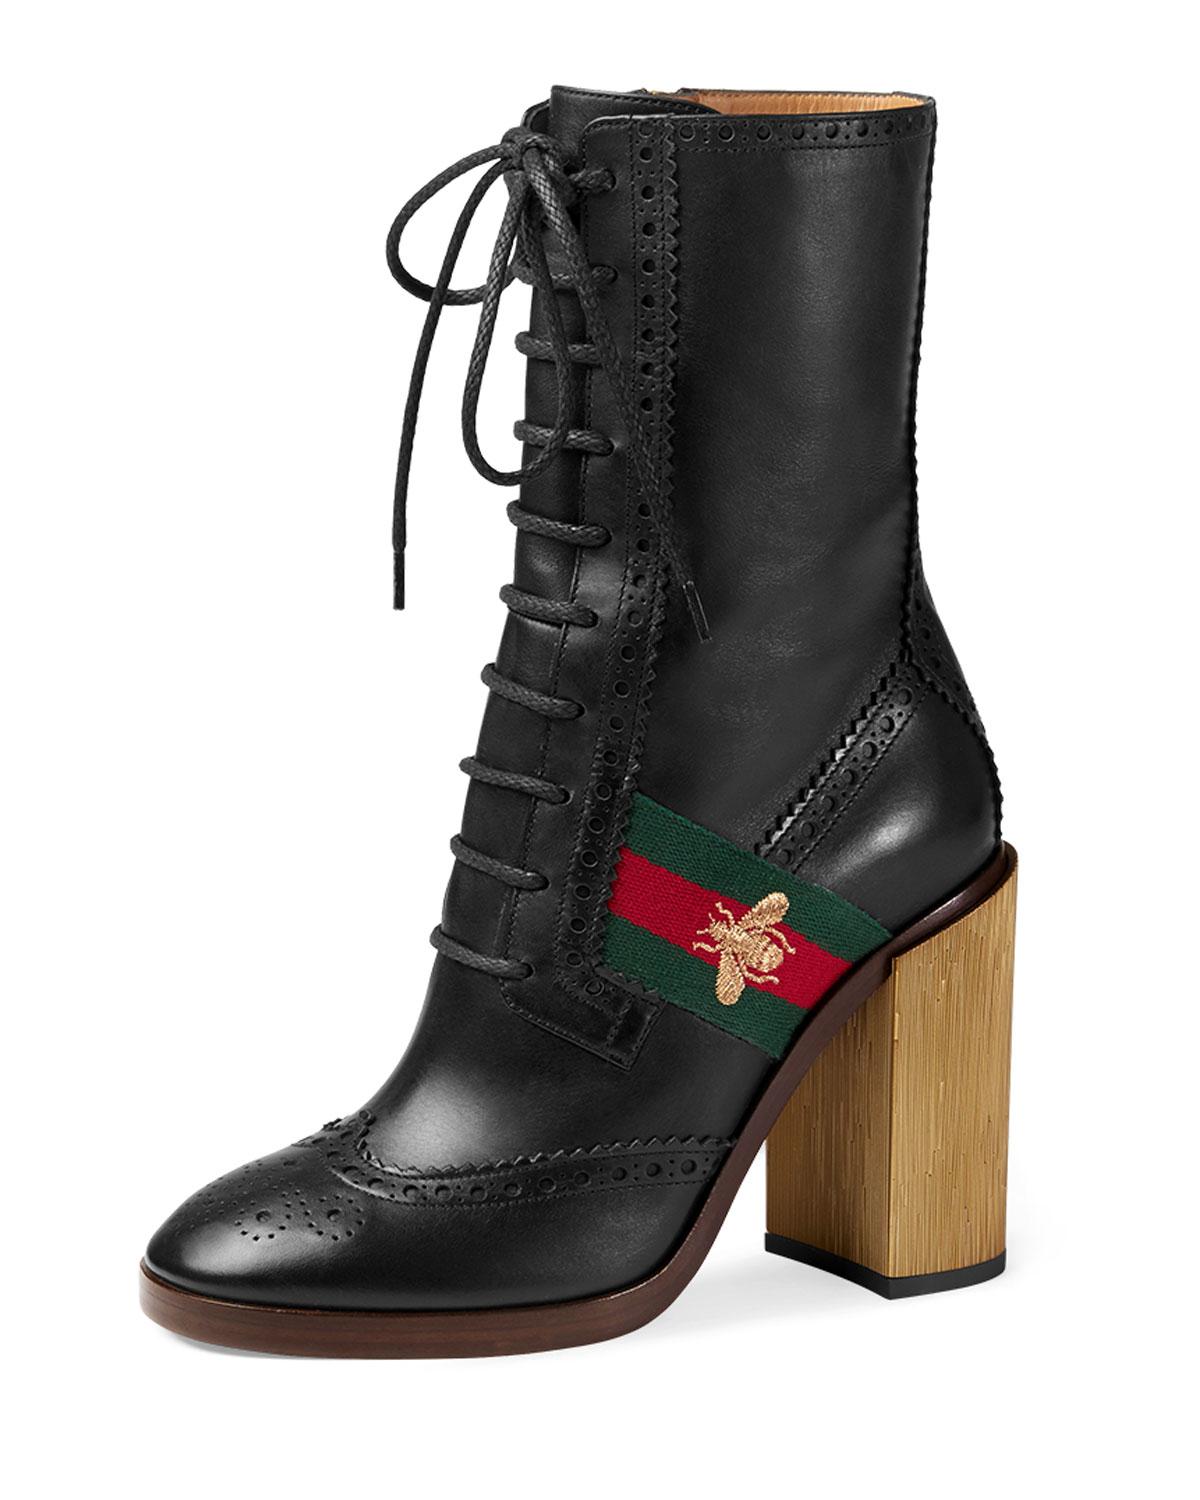 Gucci Karen Leather Knee-High Boots in Black | Lyst